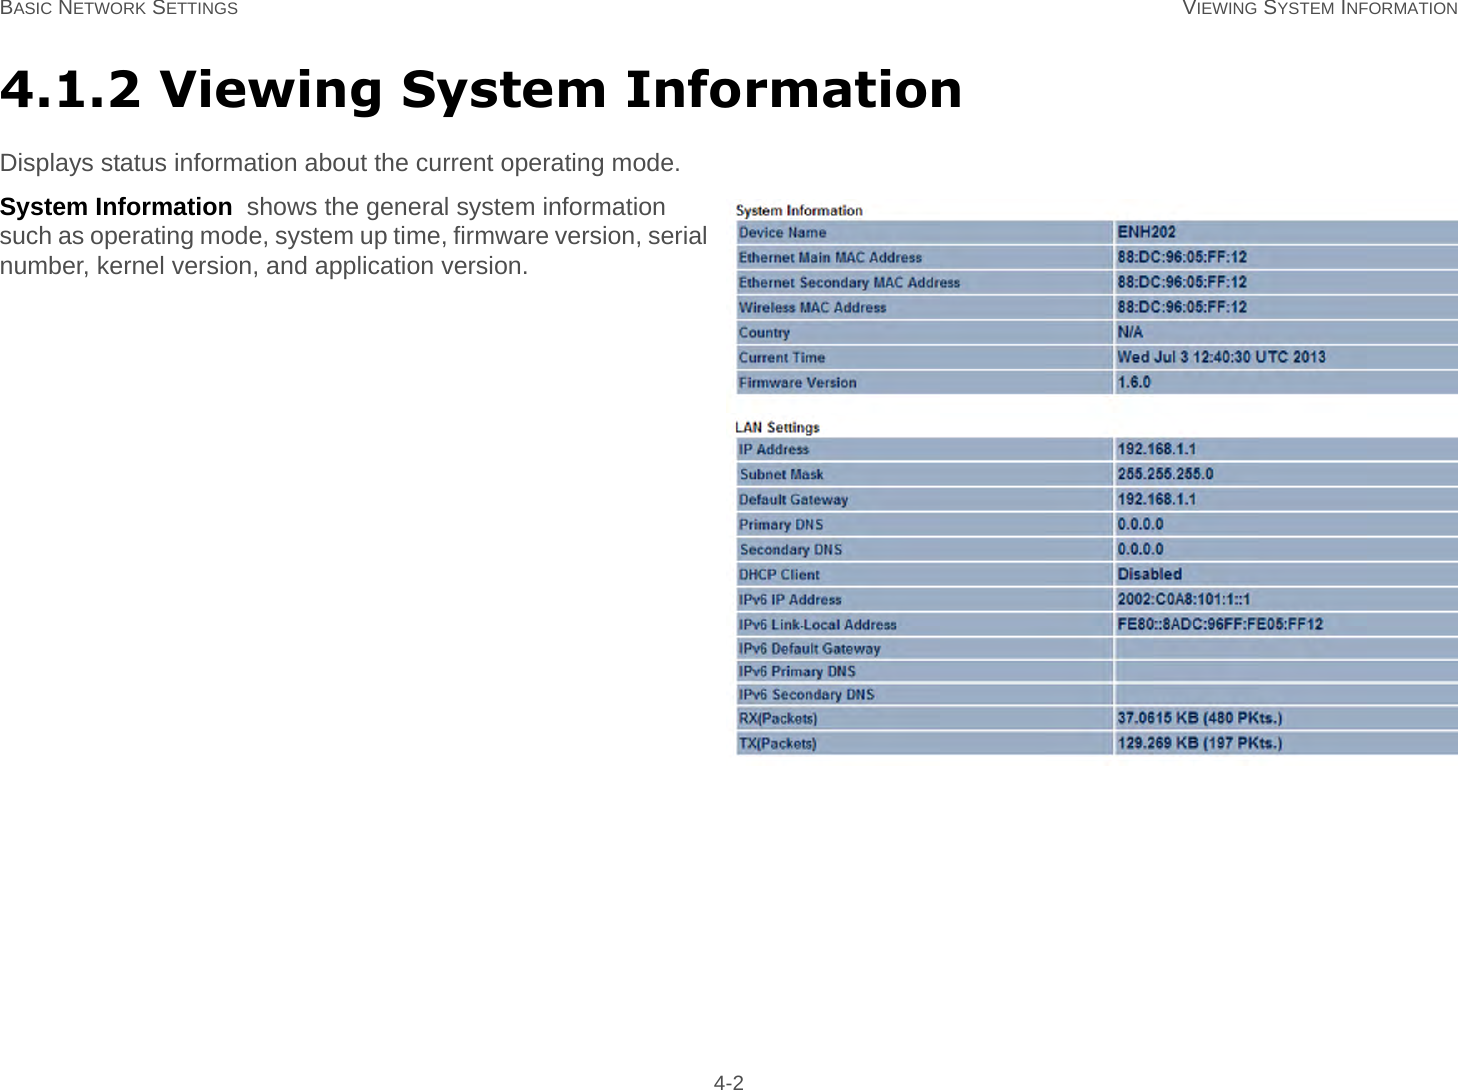 BASIC NETWORK SETTINGS VIEWING SYSTEM INFORMATION 4-24.1.2 Viewing System InformationDisplays status information about the current operating mode.System Information  shows the general system information such as operating mode, system up time, firmware version, serial number, kernel version, and application version.